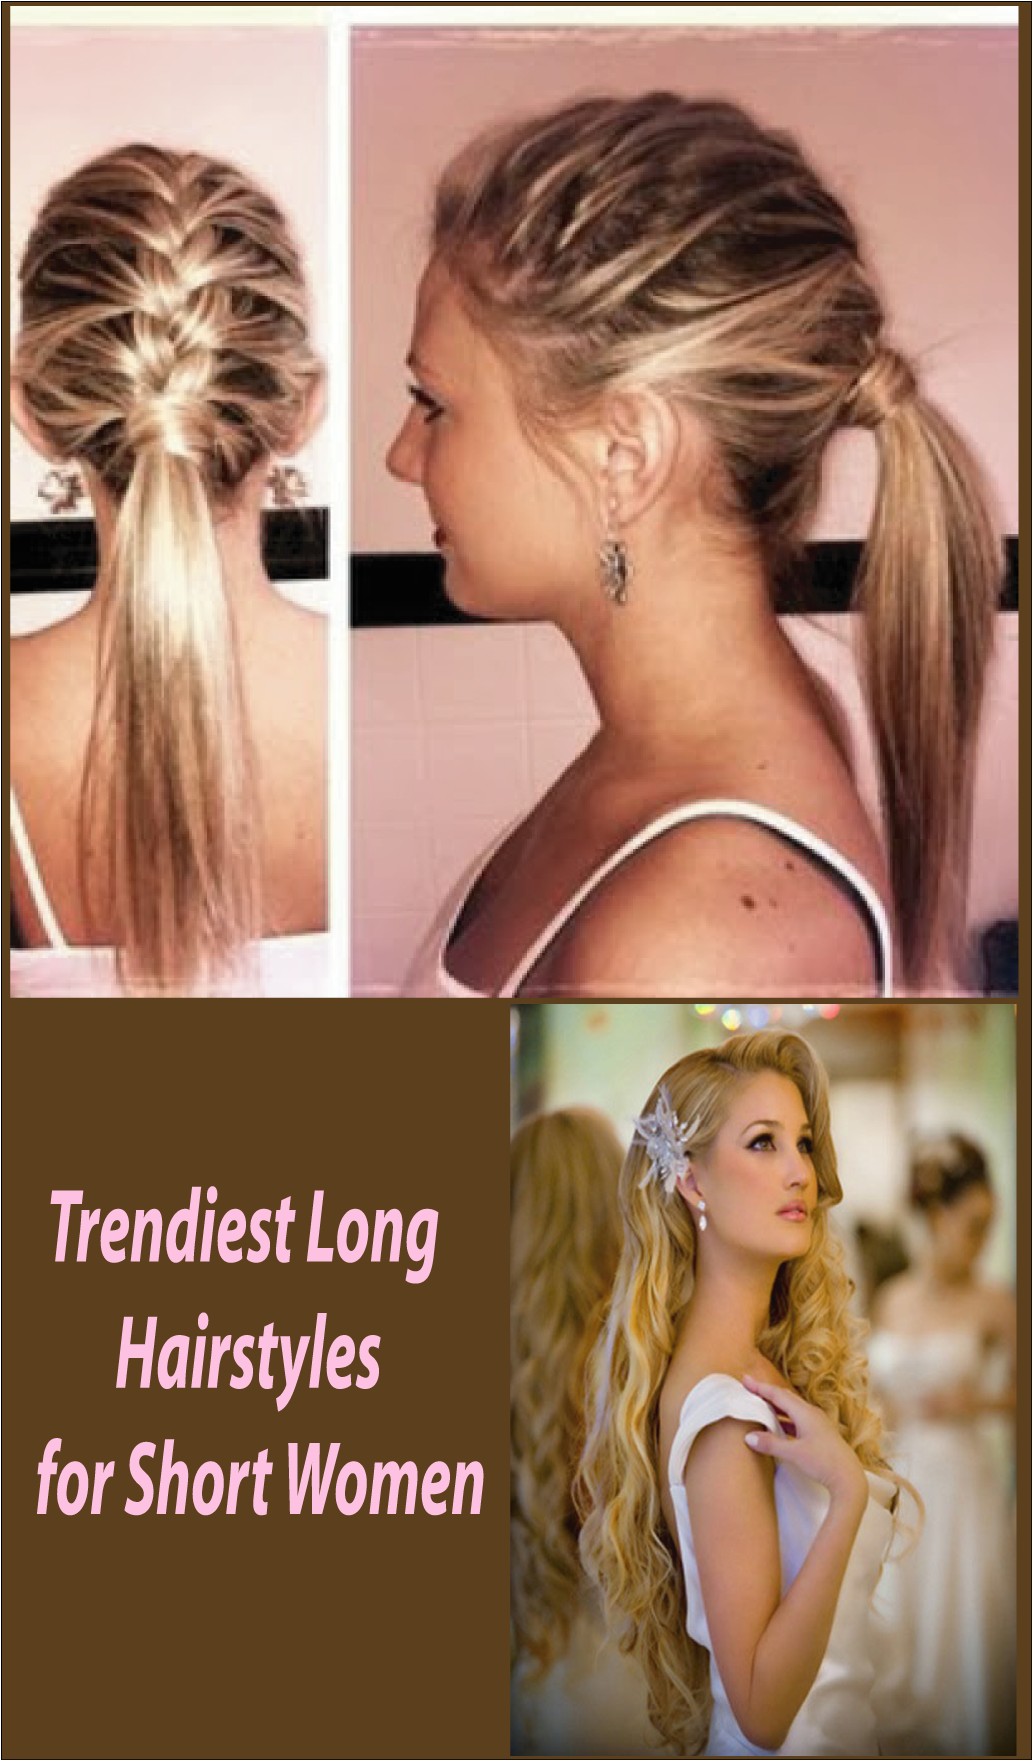 Petite women face some difficult to choose a right hairstyle Want a style that goes